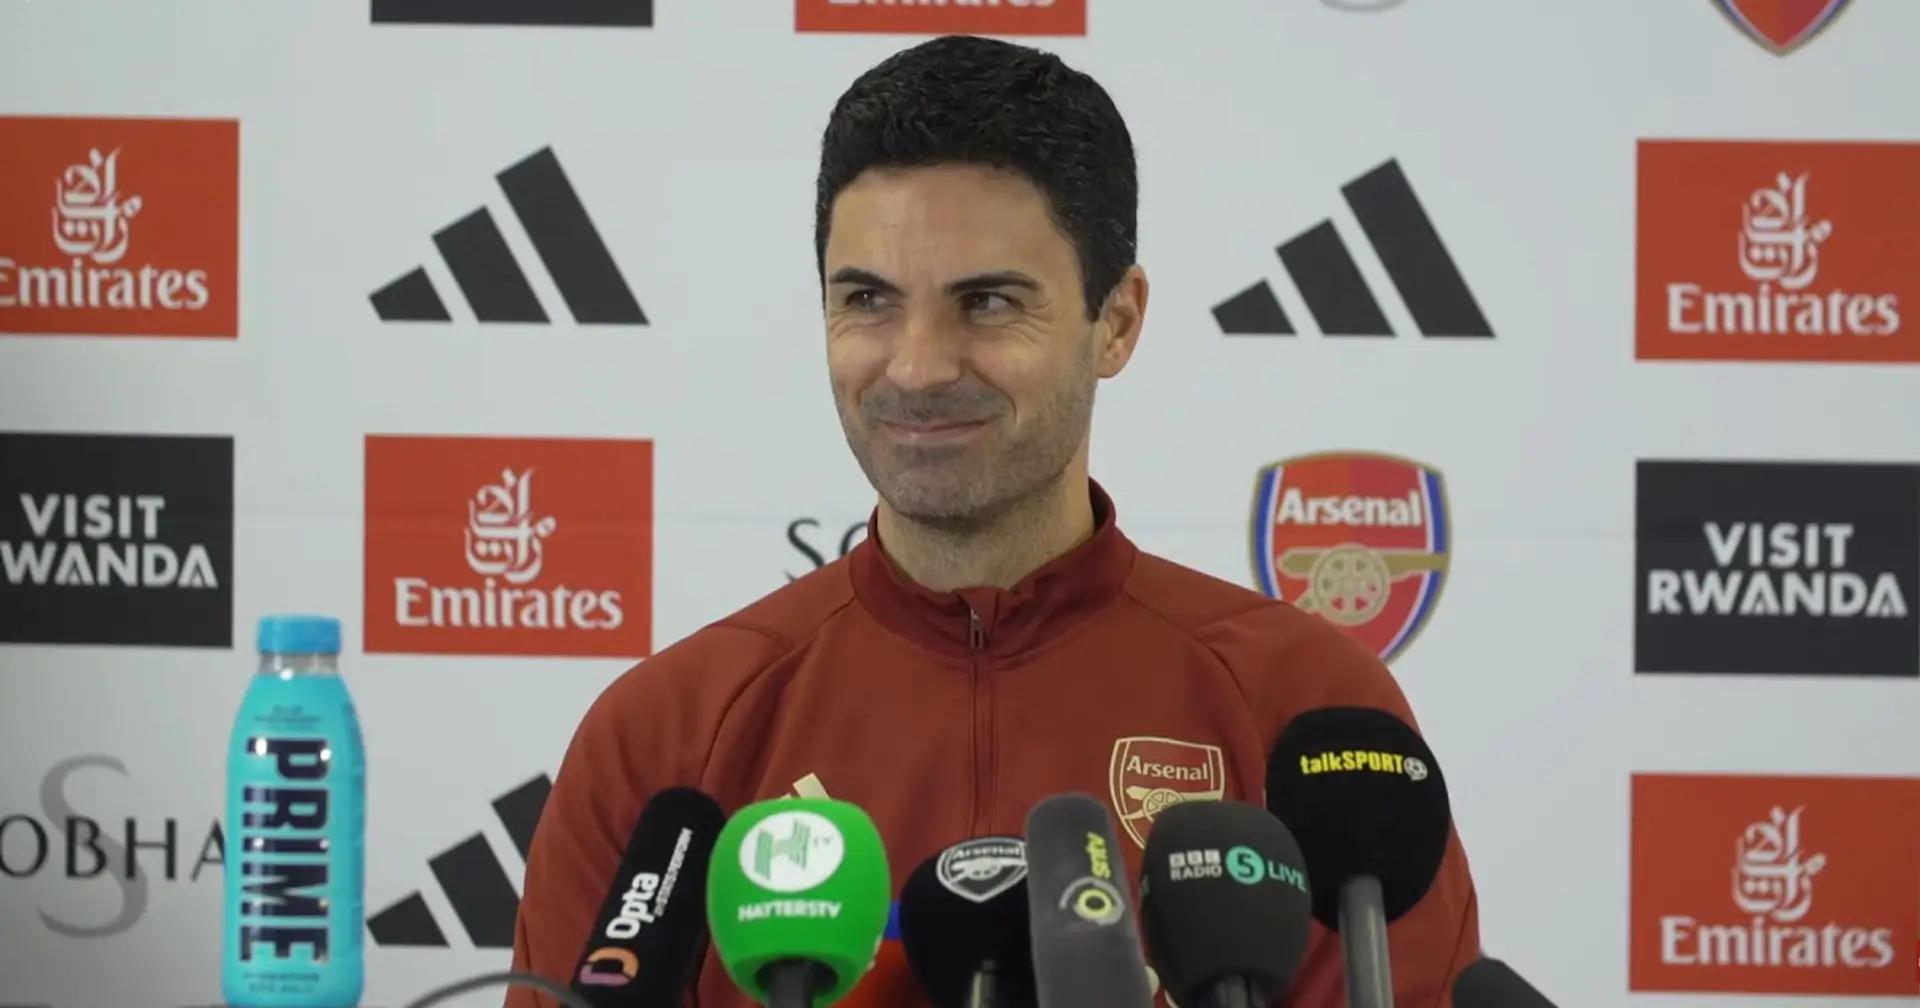 'Why not?': Mikel Arteta responds to Mbappe rumours